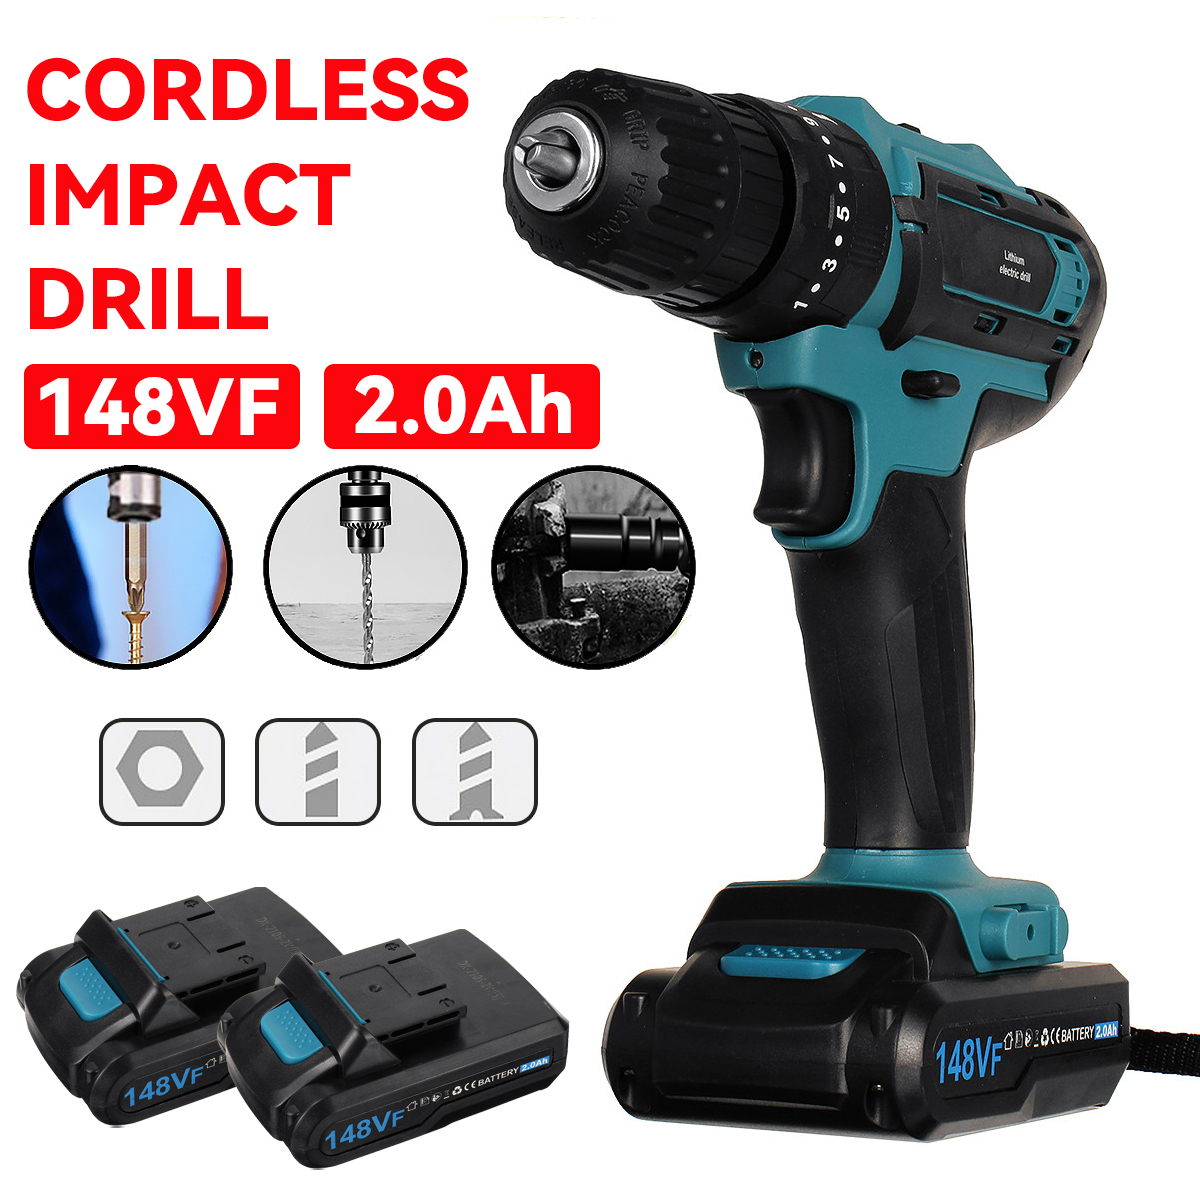 148VF-20Ah-Cordless-Electric-Impact-Drill-Rechargeable-Drill-Screwdriver-W-1-or-2-Li-ion-Battery-1888042-1